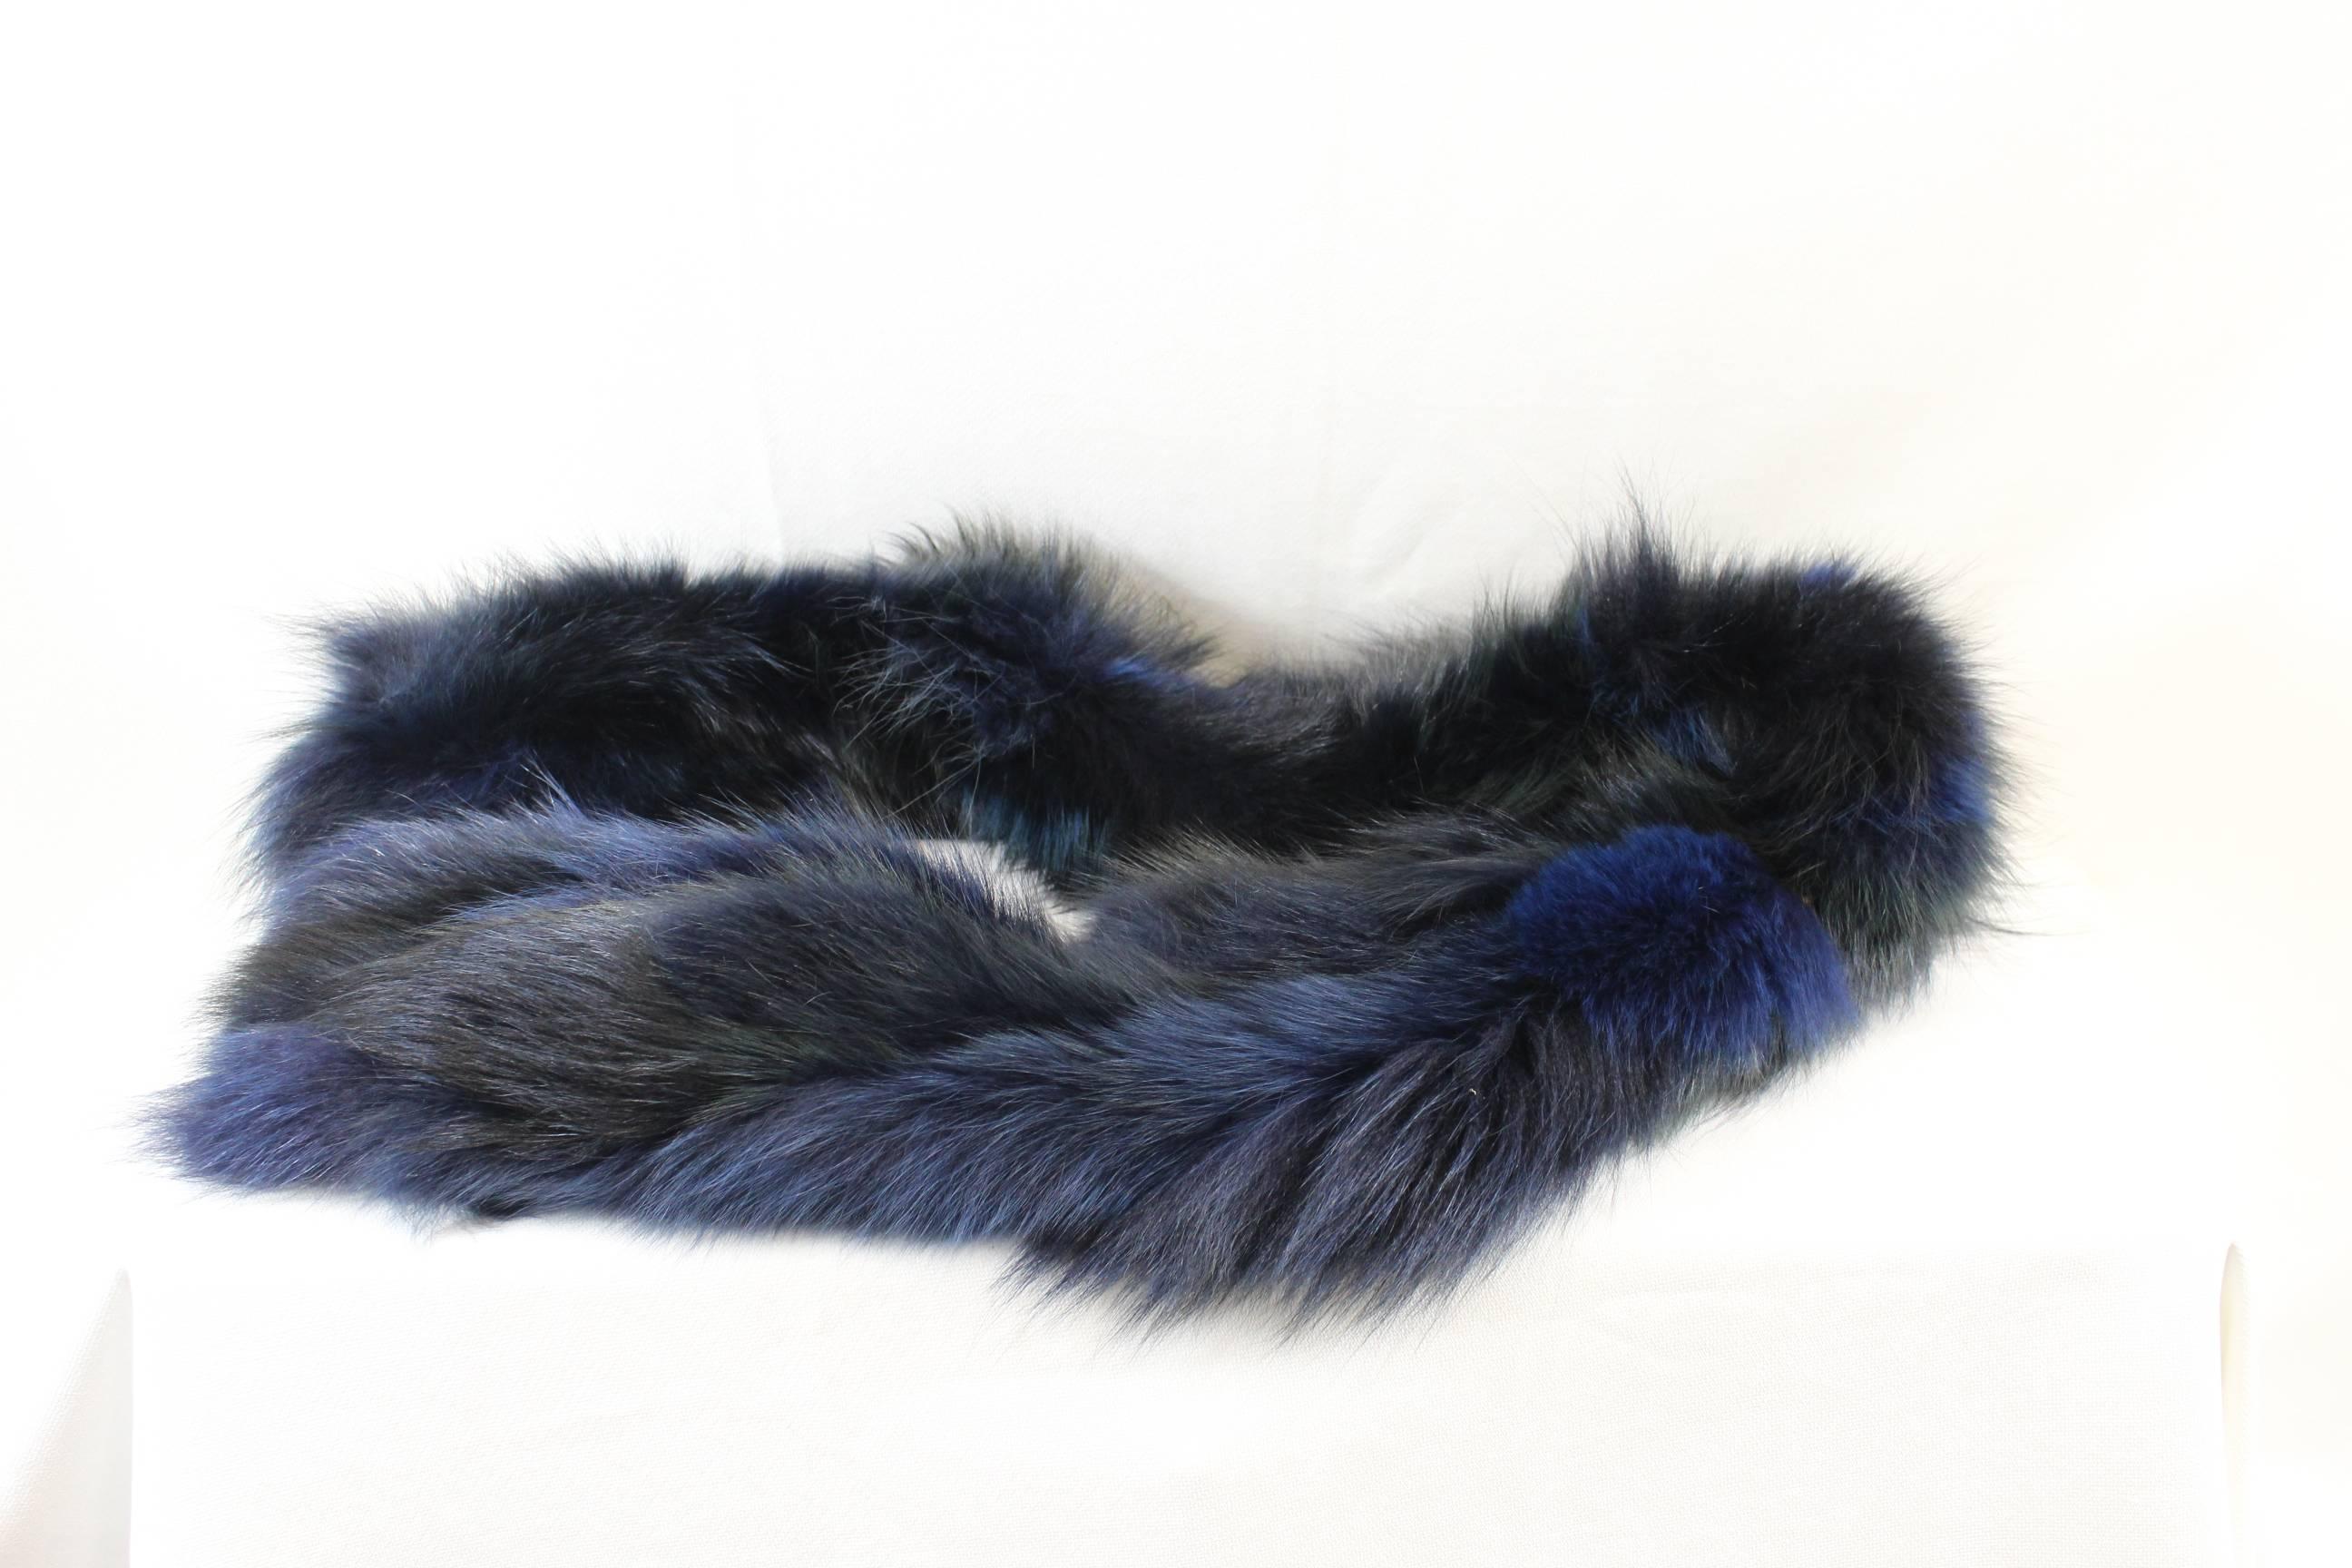 Super ncie scarf in fox.

Color Blue and black. Super elegant and class.

Lenght 45 inches